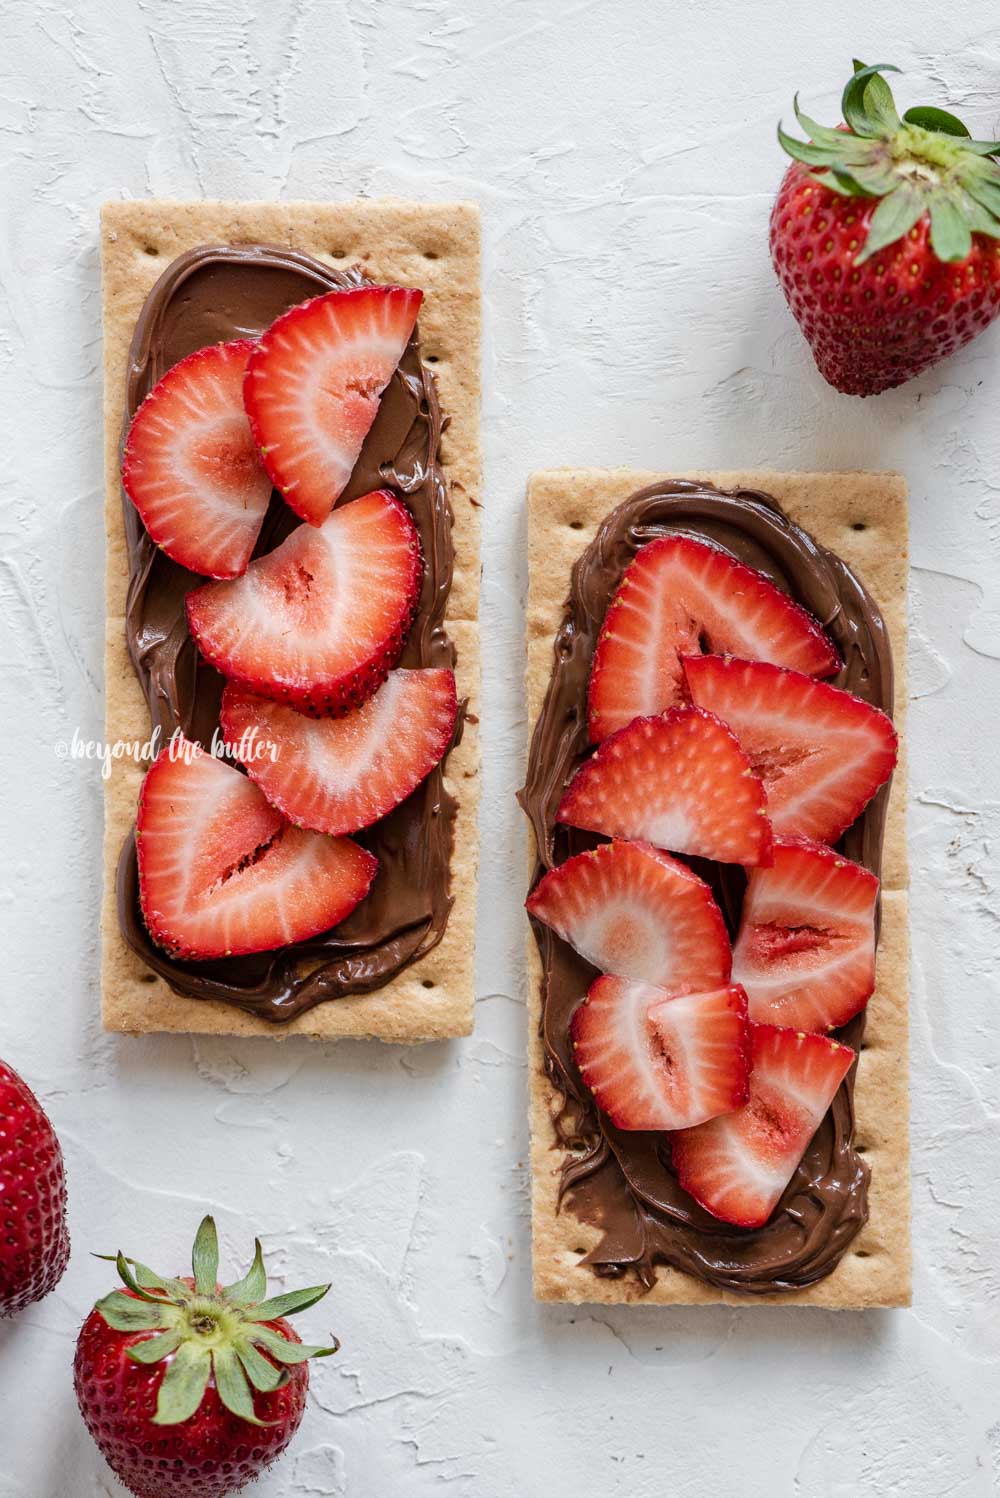 Image of strawberries and nutella spread over top of 2 graham crackers | All Images © Beyond the Butter®